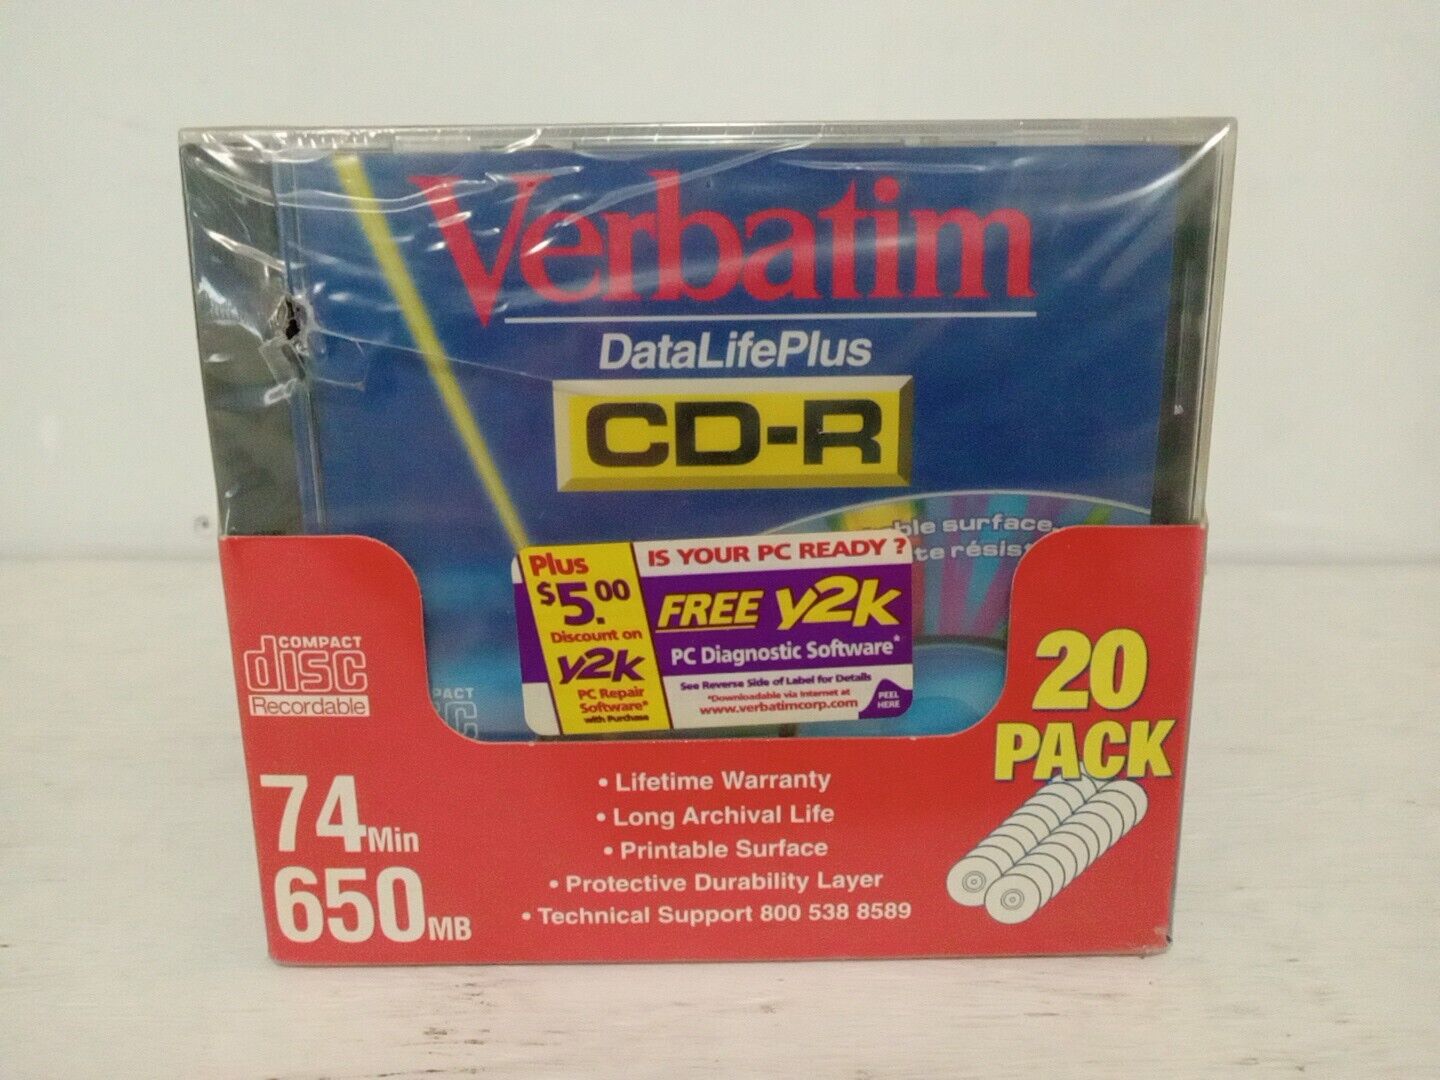 Verbatim Data Life Plus CD-R With Cases Pack of 20 Sealed 74 Min 650 MB New